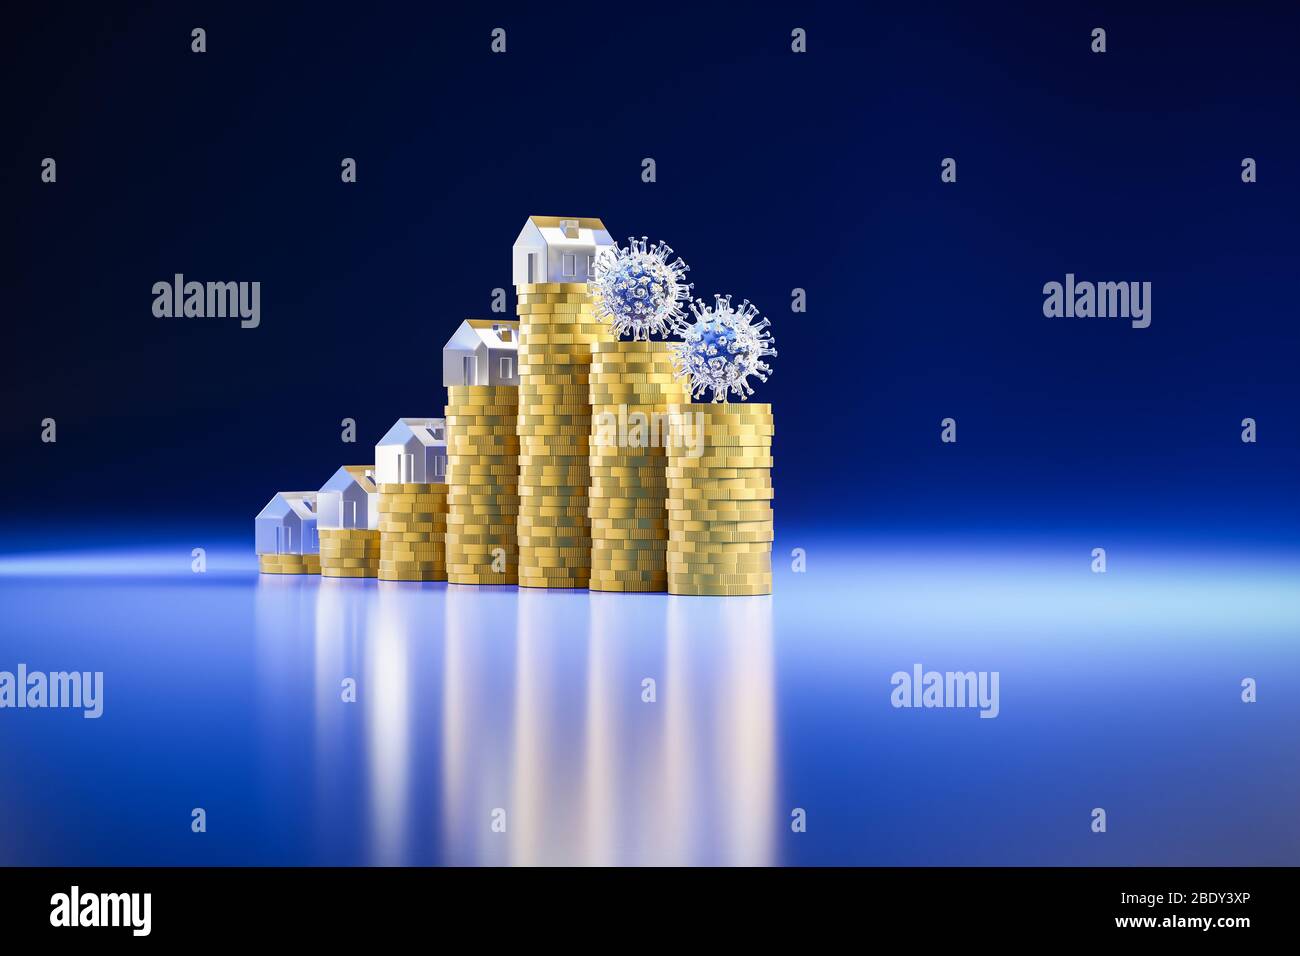 3d render: Concept: decline of housing prices because of the corona crisis. Rising stacks of coins topped with houses made from acrylic glass. Falling Stock Photo